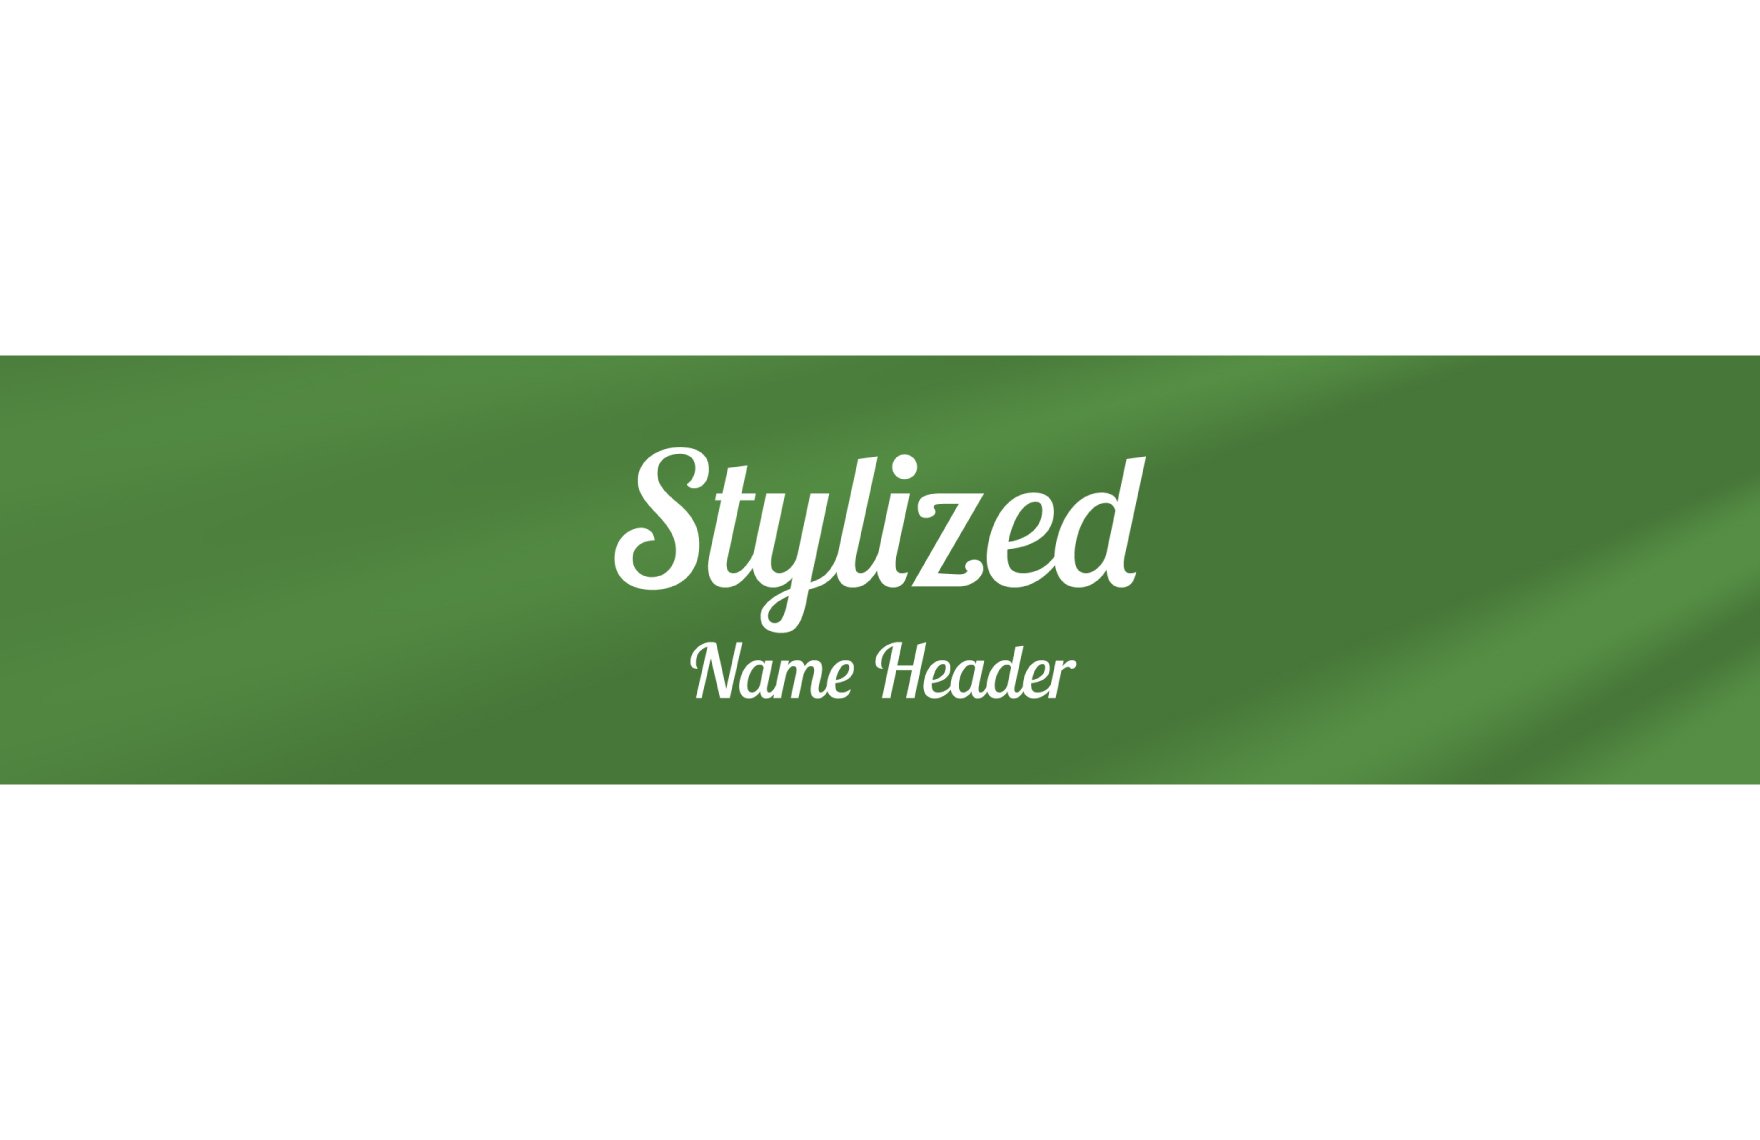 Stylized Name Header Template